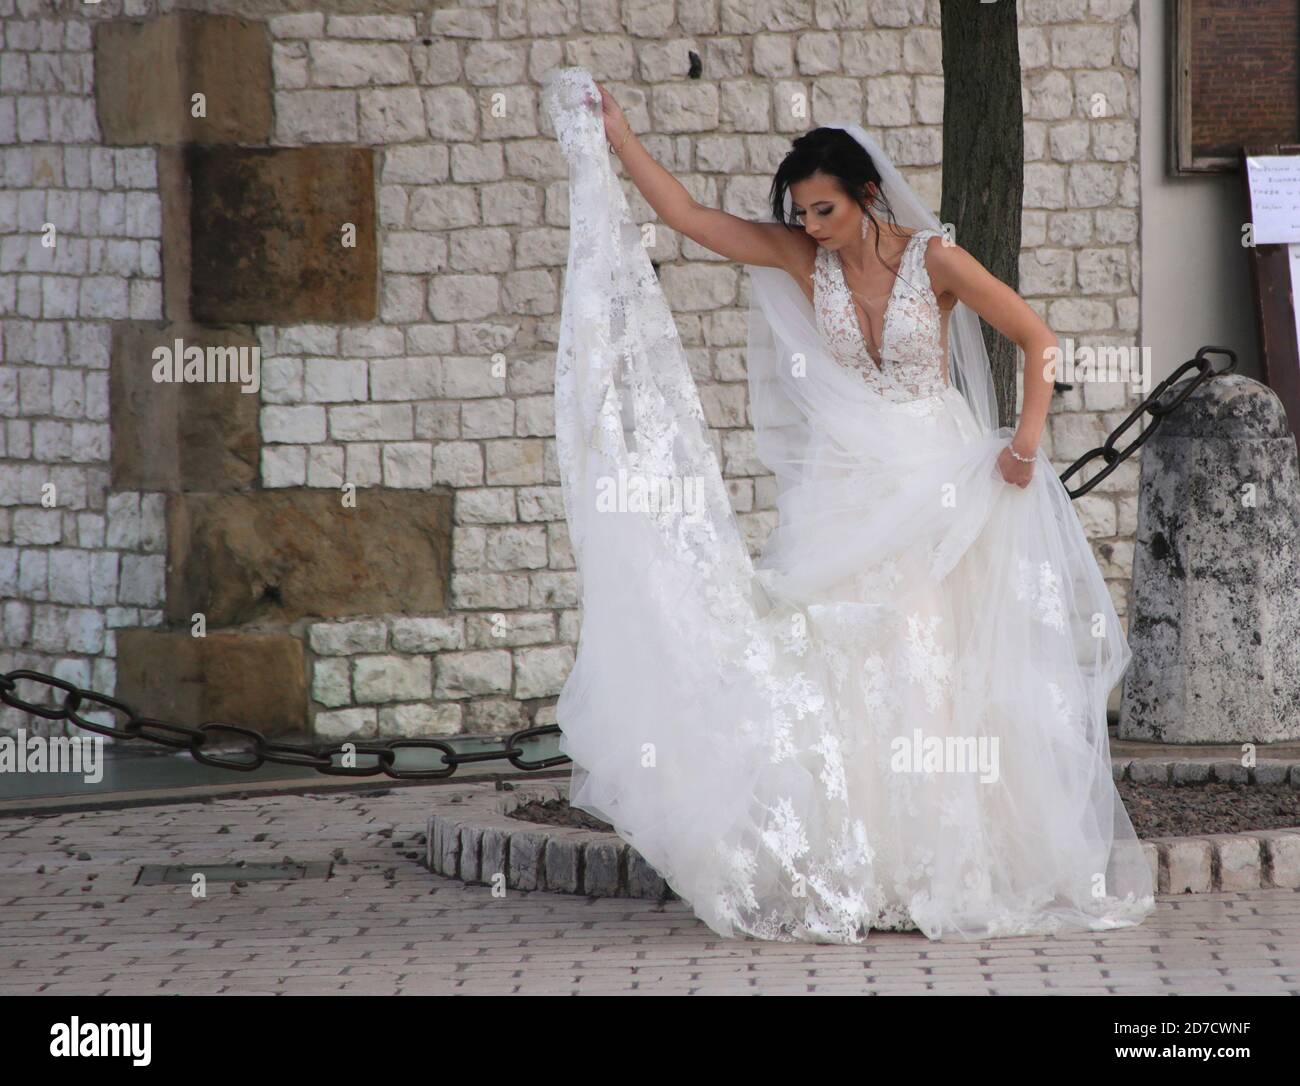 Cracow. Krakow. Poland. Young woman wearing wedding gown preparing for photo session outdoors. Stock Photo